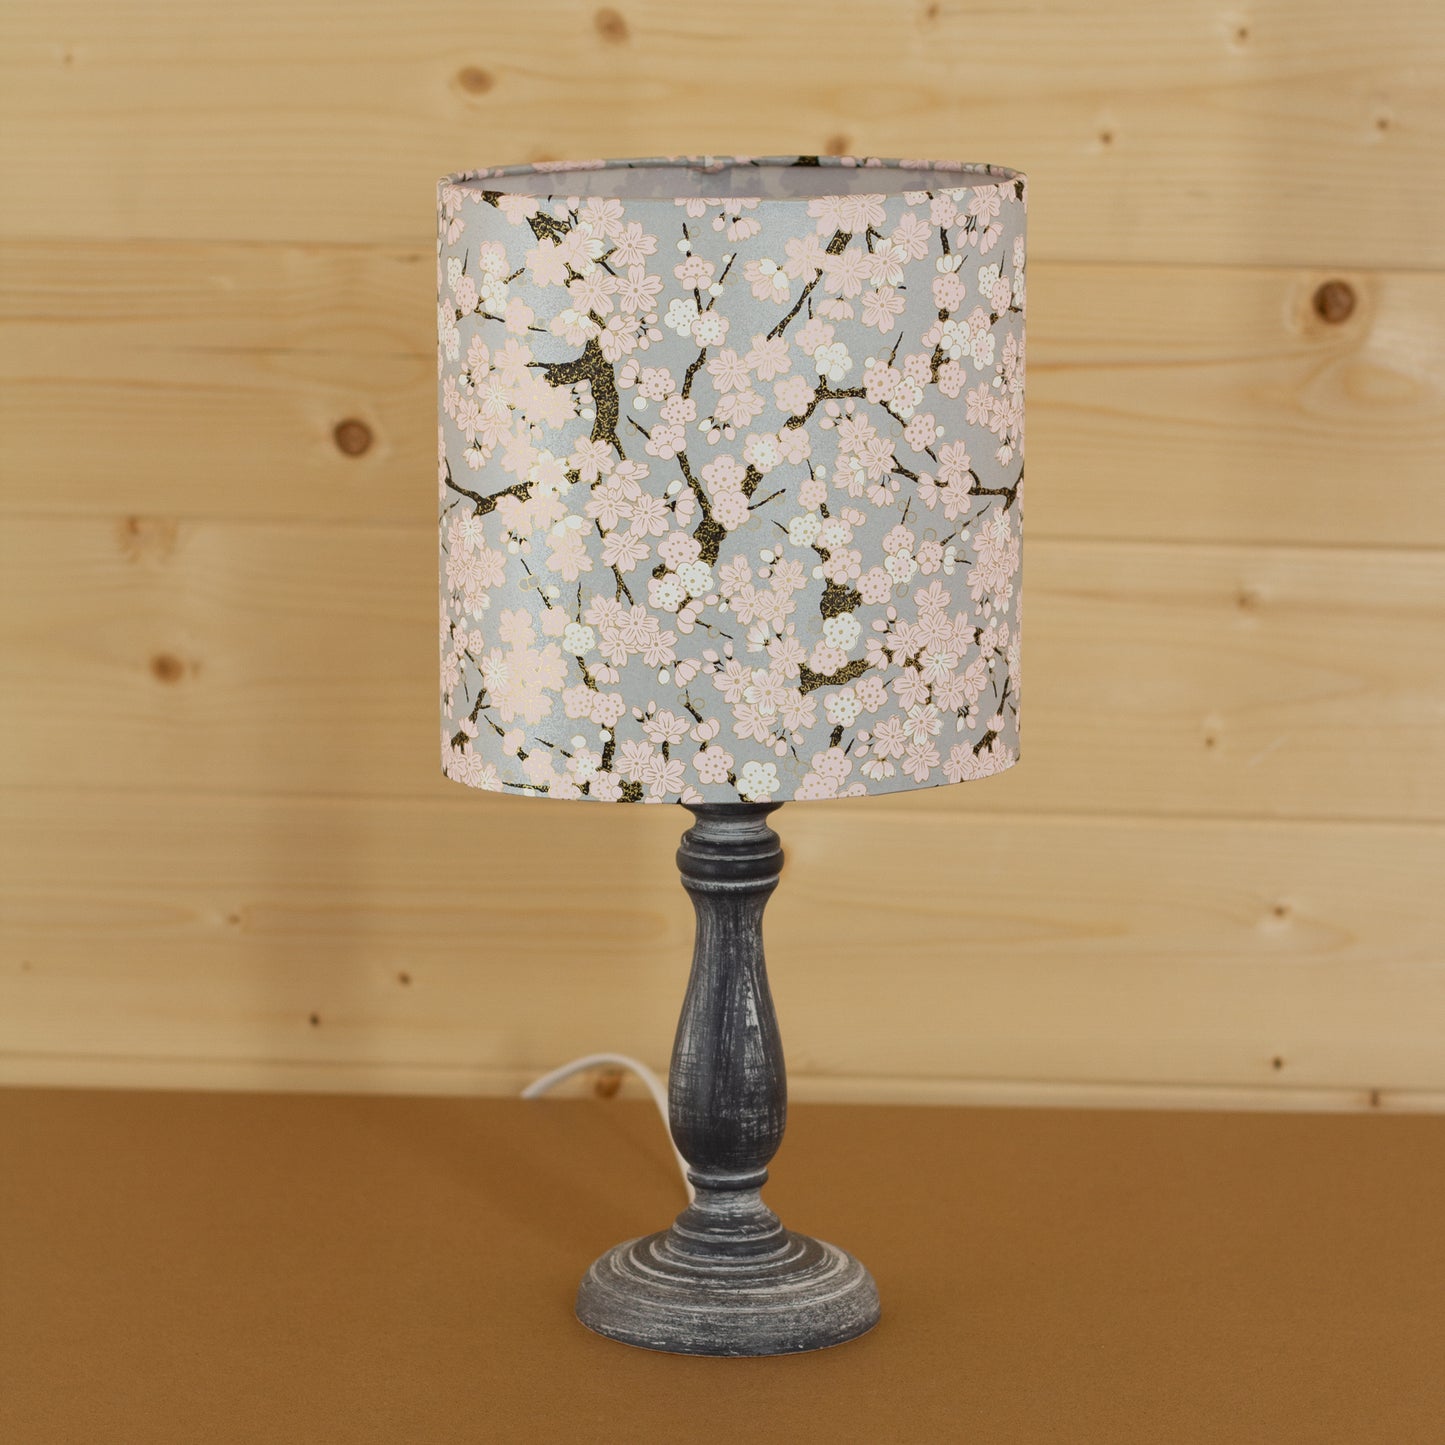 Paros Wooden Table Lamp with a Oval Shade in W02 ~ Pink Cherry Blossom on Grey